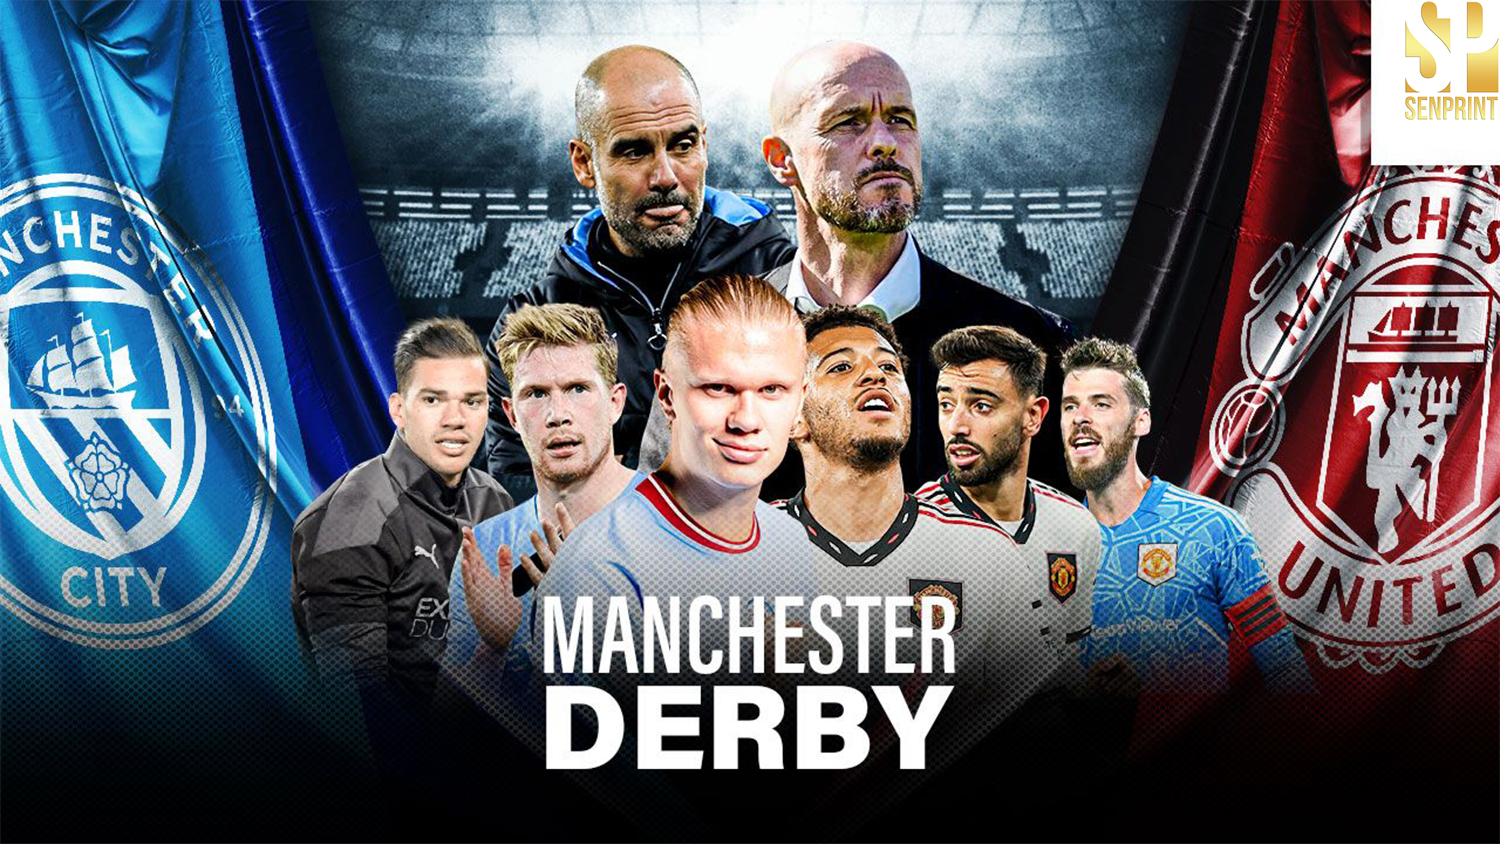 The Battle of Manchester City vs. United Clash at the Etihad